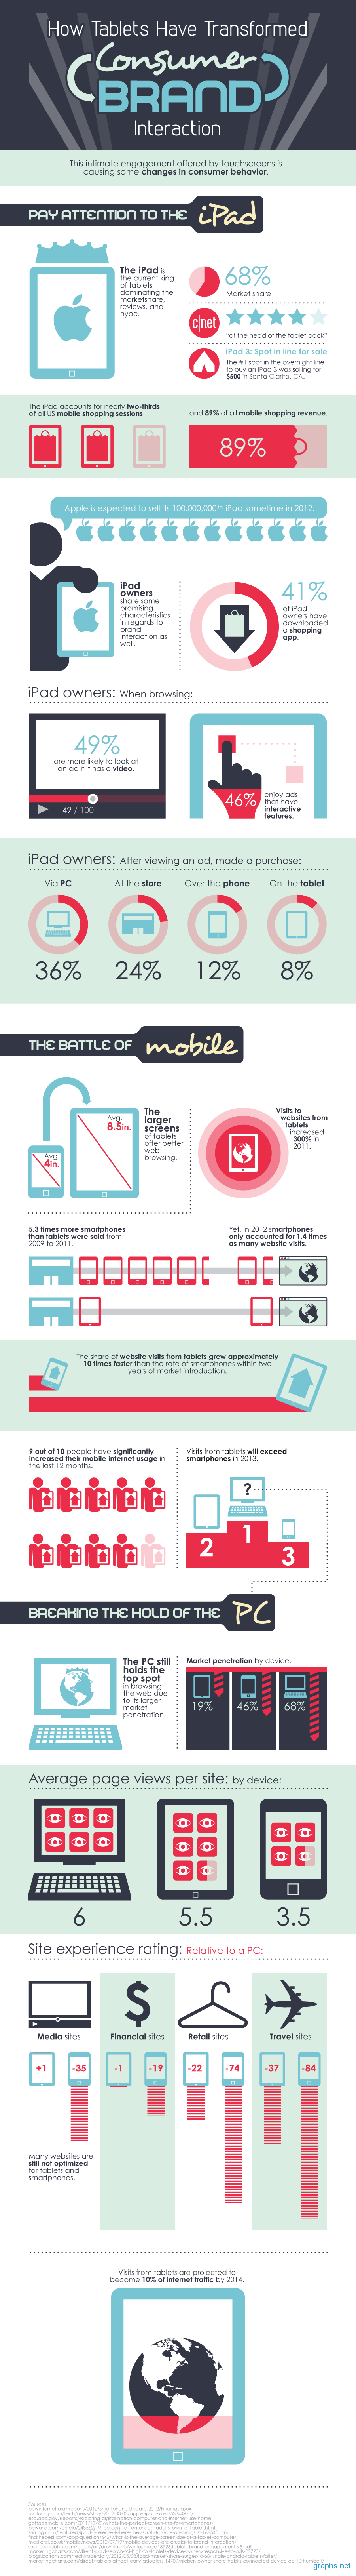 Facts About Tablet Growth 2012